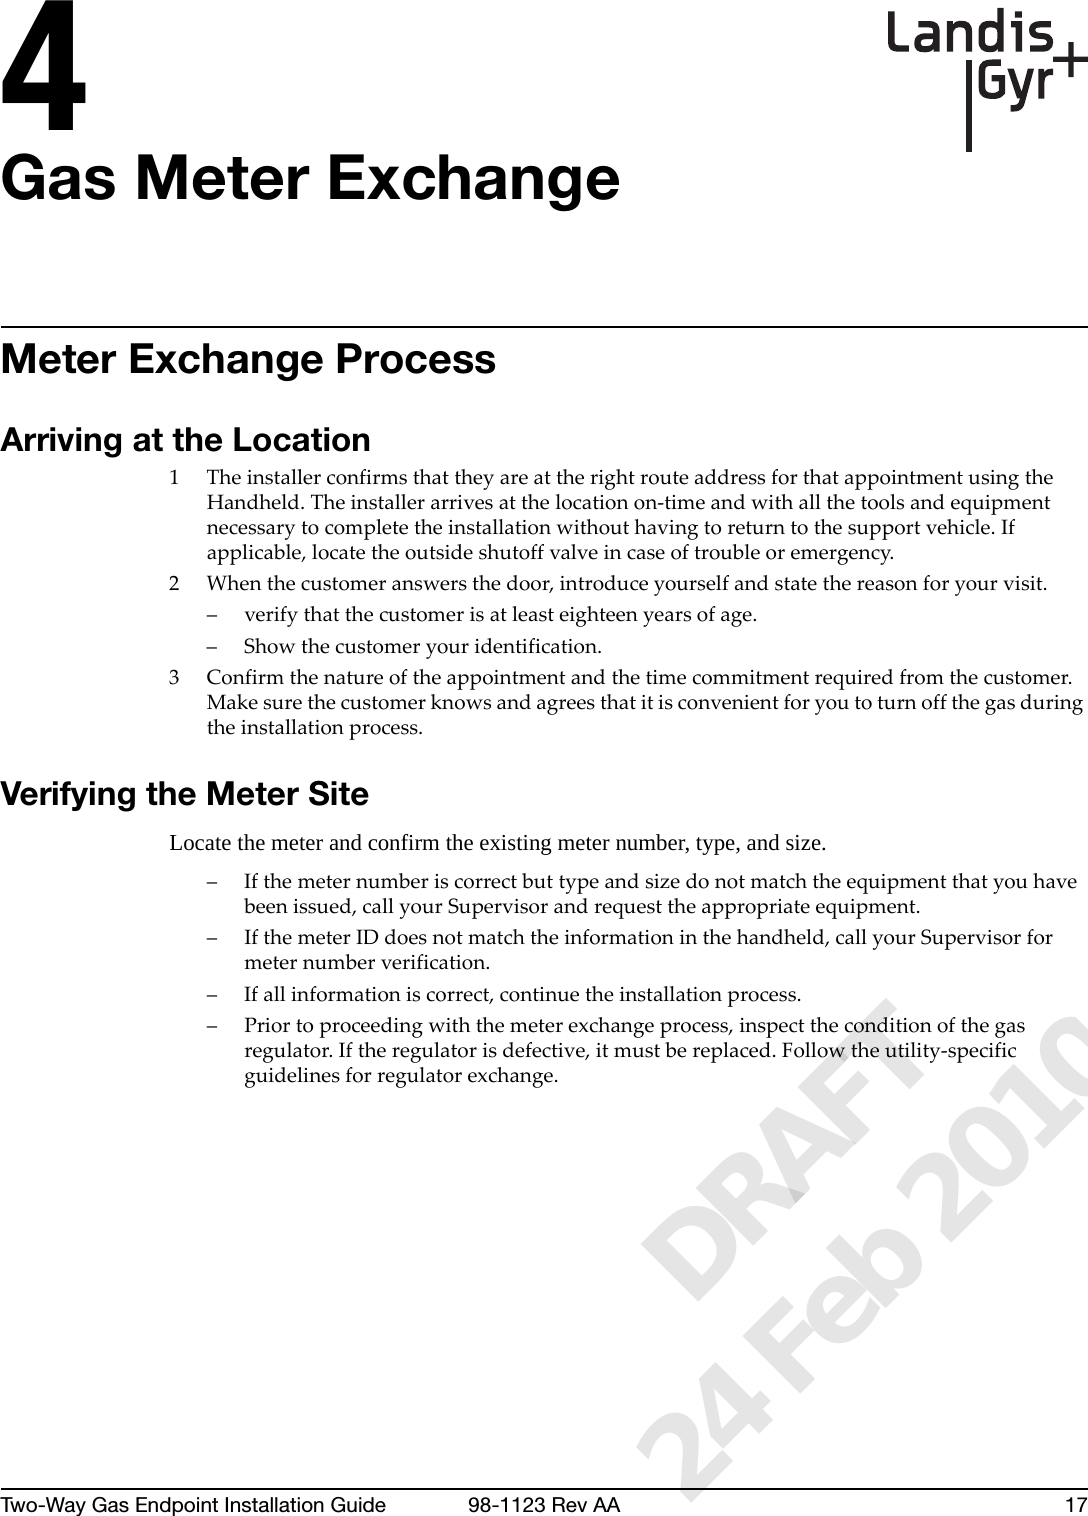 4Two-Way Gas Endpoint Installation Guide 98-1123 Rev AA 17Gas Meter ExchangeMeter Exchange ProcessArriving at the Location1TheinstallerconfirmsthattheyareattherightrouteaddressforthatappointmentusingtheHandheld.Theinstallerarrivesatthelocationon‐timeandwithallthetoolsandequipmentnecessarytocompletetheinstallationwithouthavingtoreturntothesupportvehicle.Ifapplicable,locatetheoutsideshutoffvalveincaseoftroubleoremergency.2Whenthecustomeranswersthedoor,introduceyourselfandstatethereasonforyourvisit.–verifythatthecustomerisatleasteighteenyearsofage.– Showthecustomeryouridentification.3 Confirmthenatureoftheappointmentandthetimecommitmentrequiredfromthecustomer.Makesurethecustomerknowsandagreesthatitisconvenientforyoutoturnoffthegasduringtheinstallationprocess.Verifying the Meter SiteLocate the meter and confirm the existing meter number, type, and size. –Ifthemeternumberiscorrectbuttypeandsizedonotmatchtheequipmentthatyouhavebeenissued,callyourSupervisorandrequesttheappropriateequipment.–IfthemeterIDdoesnotmatchtheinformationinthehandheld,callyourSupervisorformeternumberverification.–Ifallinformationiscorrect,continuetheinstallationprocess.–Priortoproceedingwiththemeterexchangeprocess,inspecttheconditionofthegasregulator.Iftheregulatorisdefective,itmustbereplaced.Followtheutility‐specificguidelinesforregulatorexchange.      DRAFT 24 Feb 2010